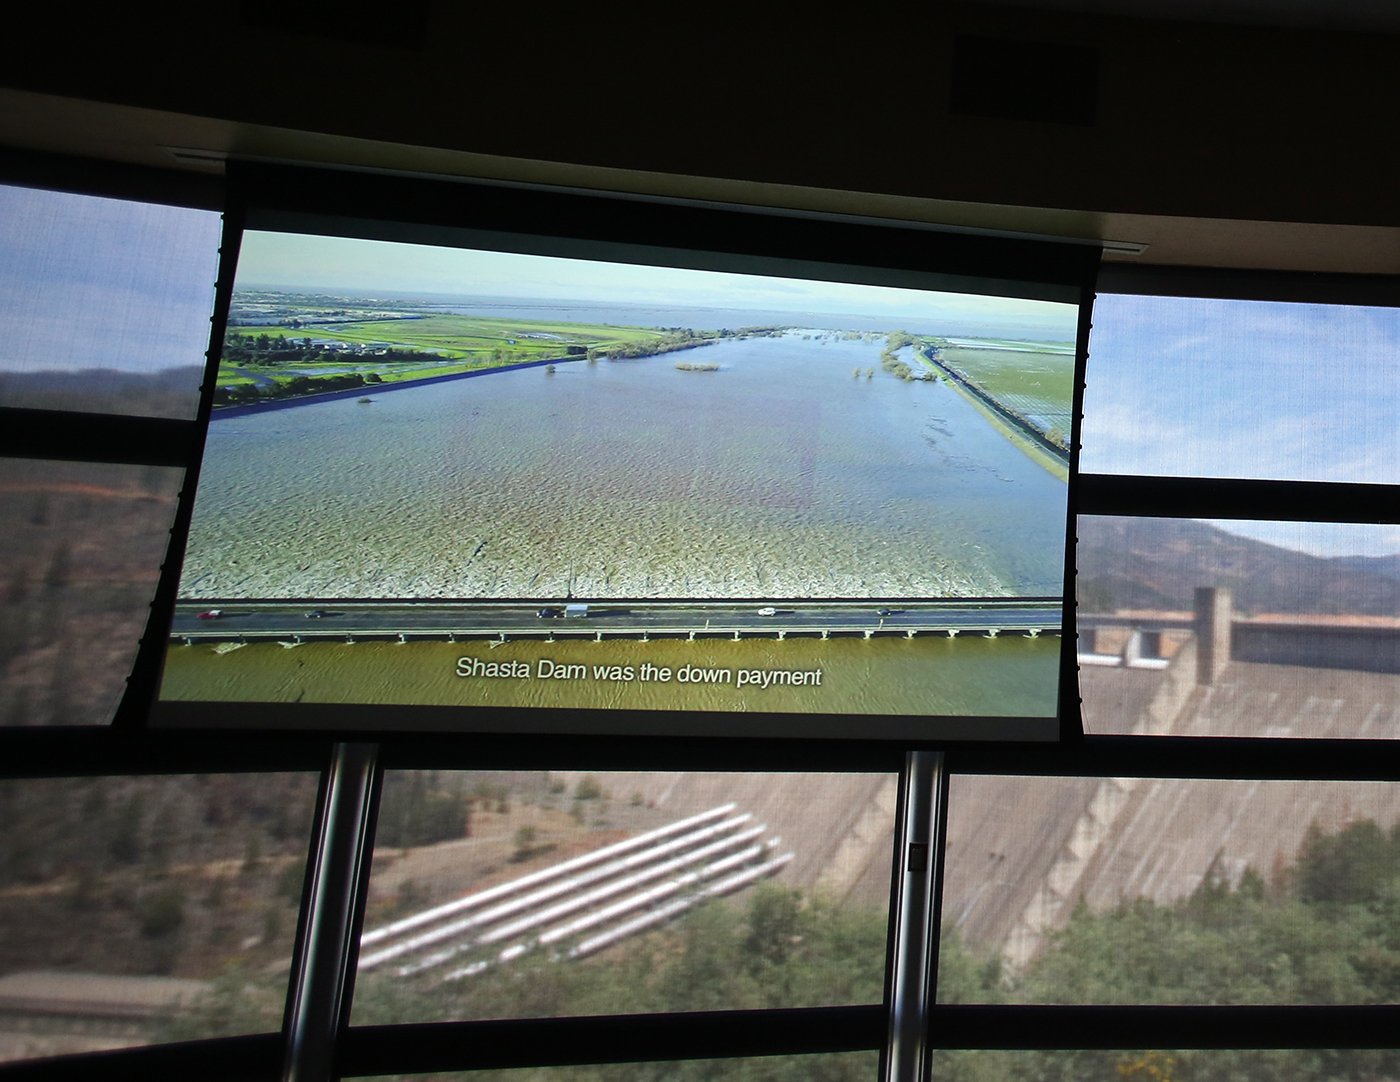  Shasta Lake, CA — A movie that celebrates Shasta Dam and what it made possible for California agriculture plays on repeat at the Visitor Center. September 25, 2019. Tom Levy/The Spiritual Edge 